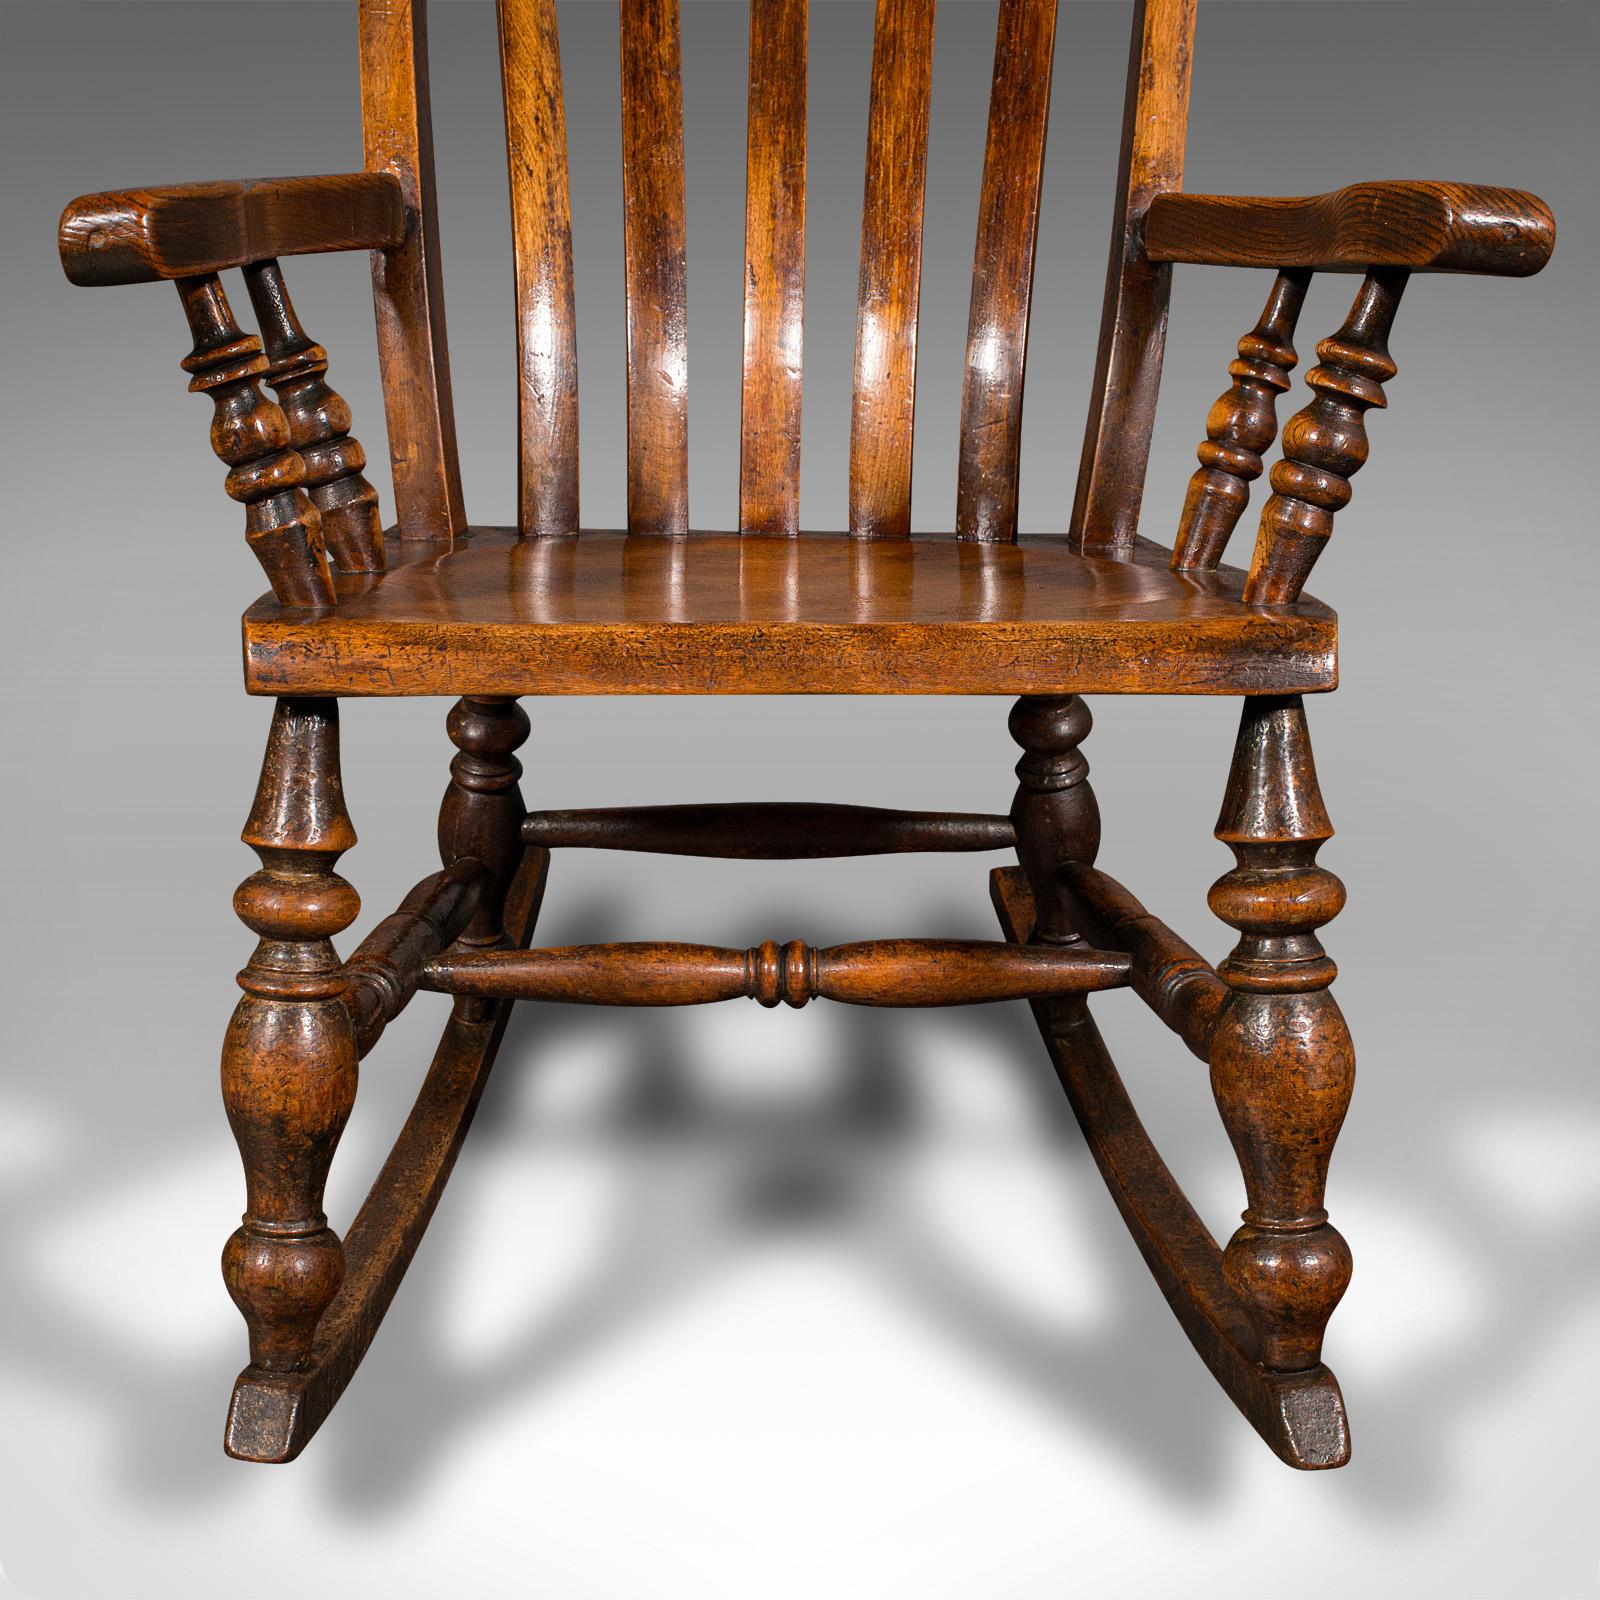 Antique Lath Back Rocking Chair, English Elm, Beech, Elbow Seat, Victorian, 1880 For Sale 6